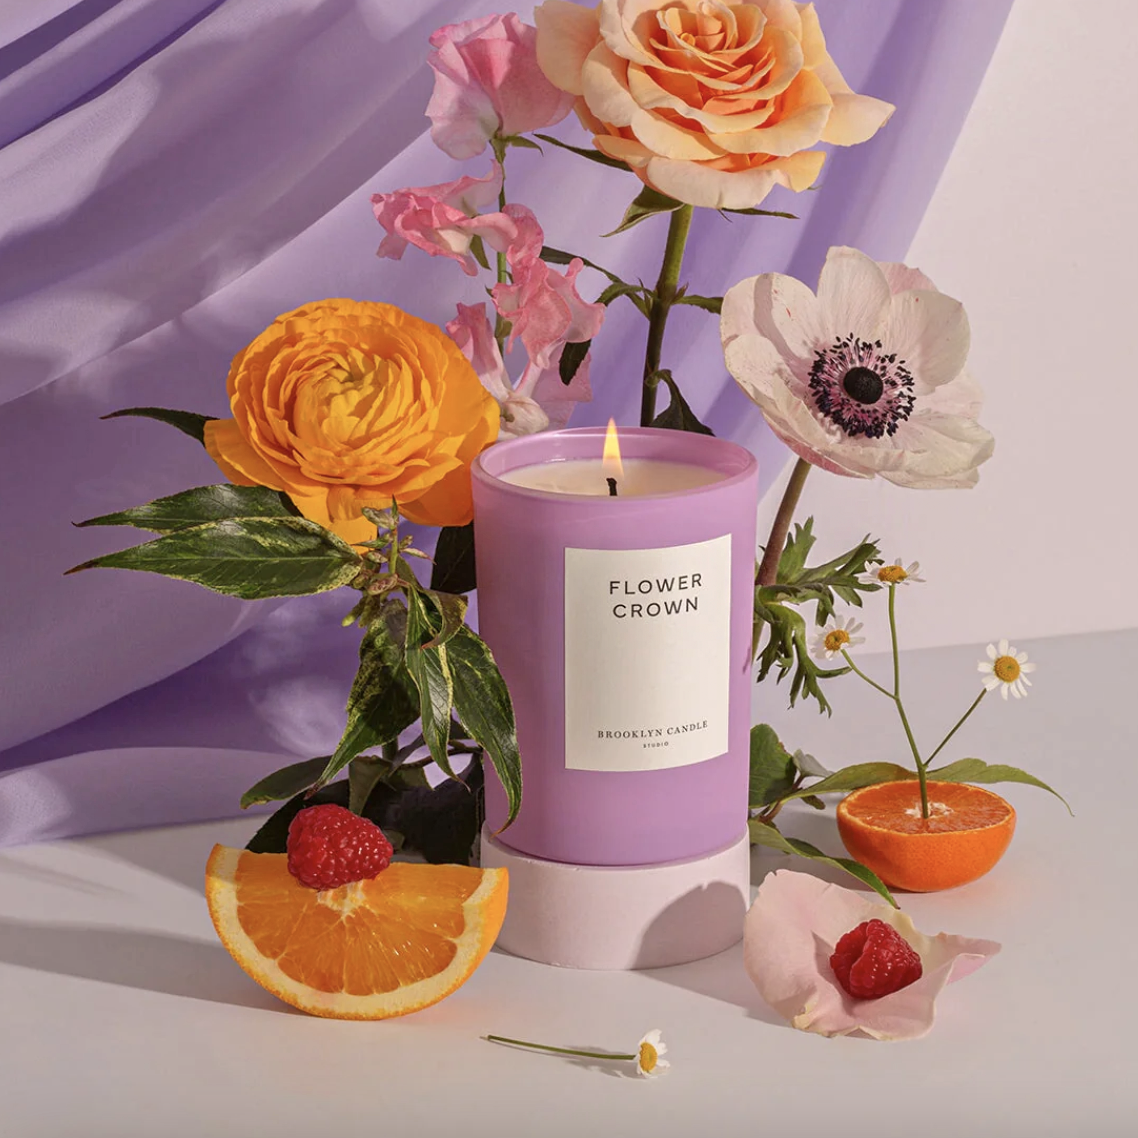 Flower Crown Limited Edition Candle | Brooklyn Candle Studio | Prelude & Dawn Los Angeles